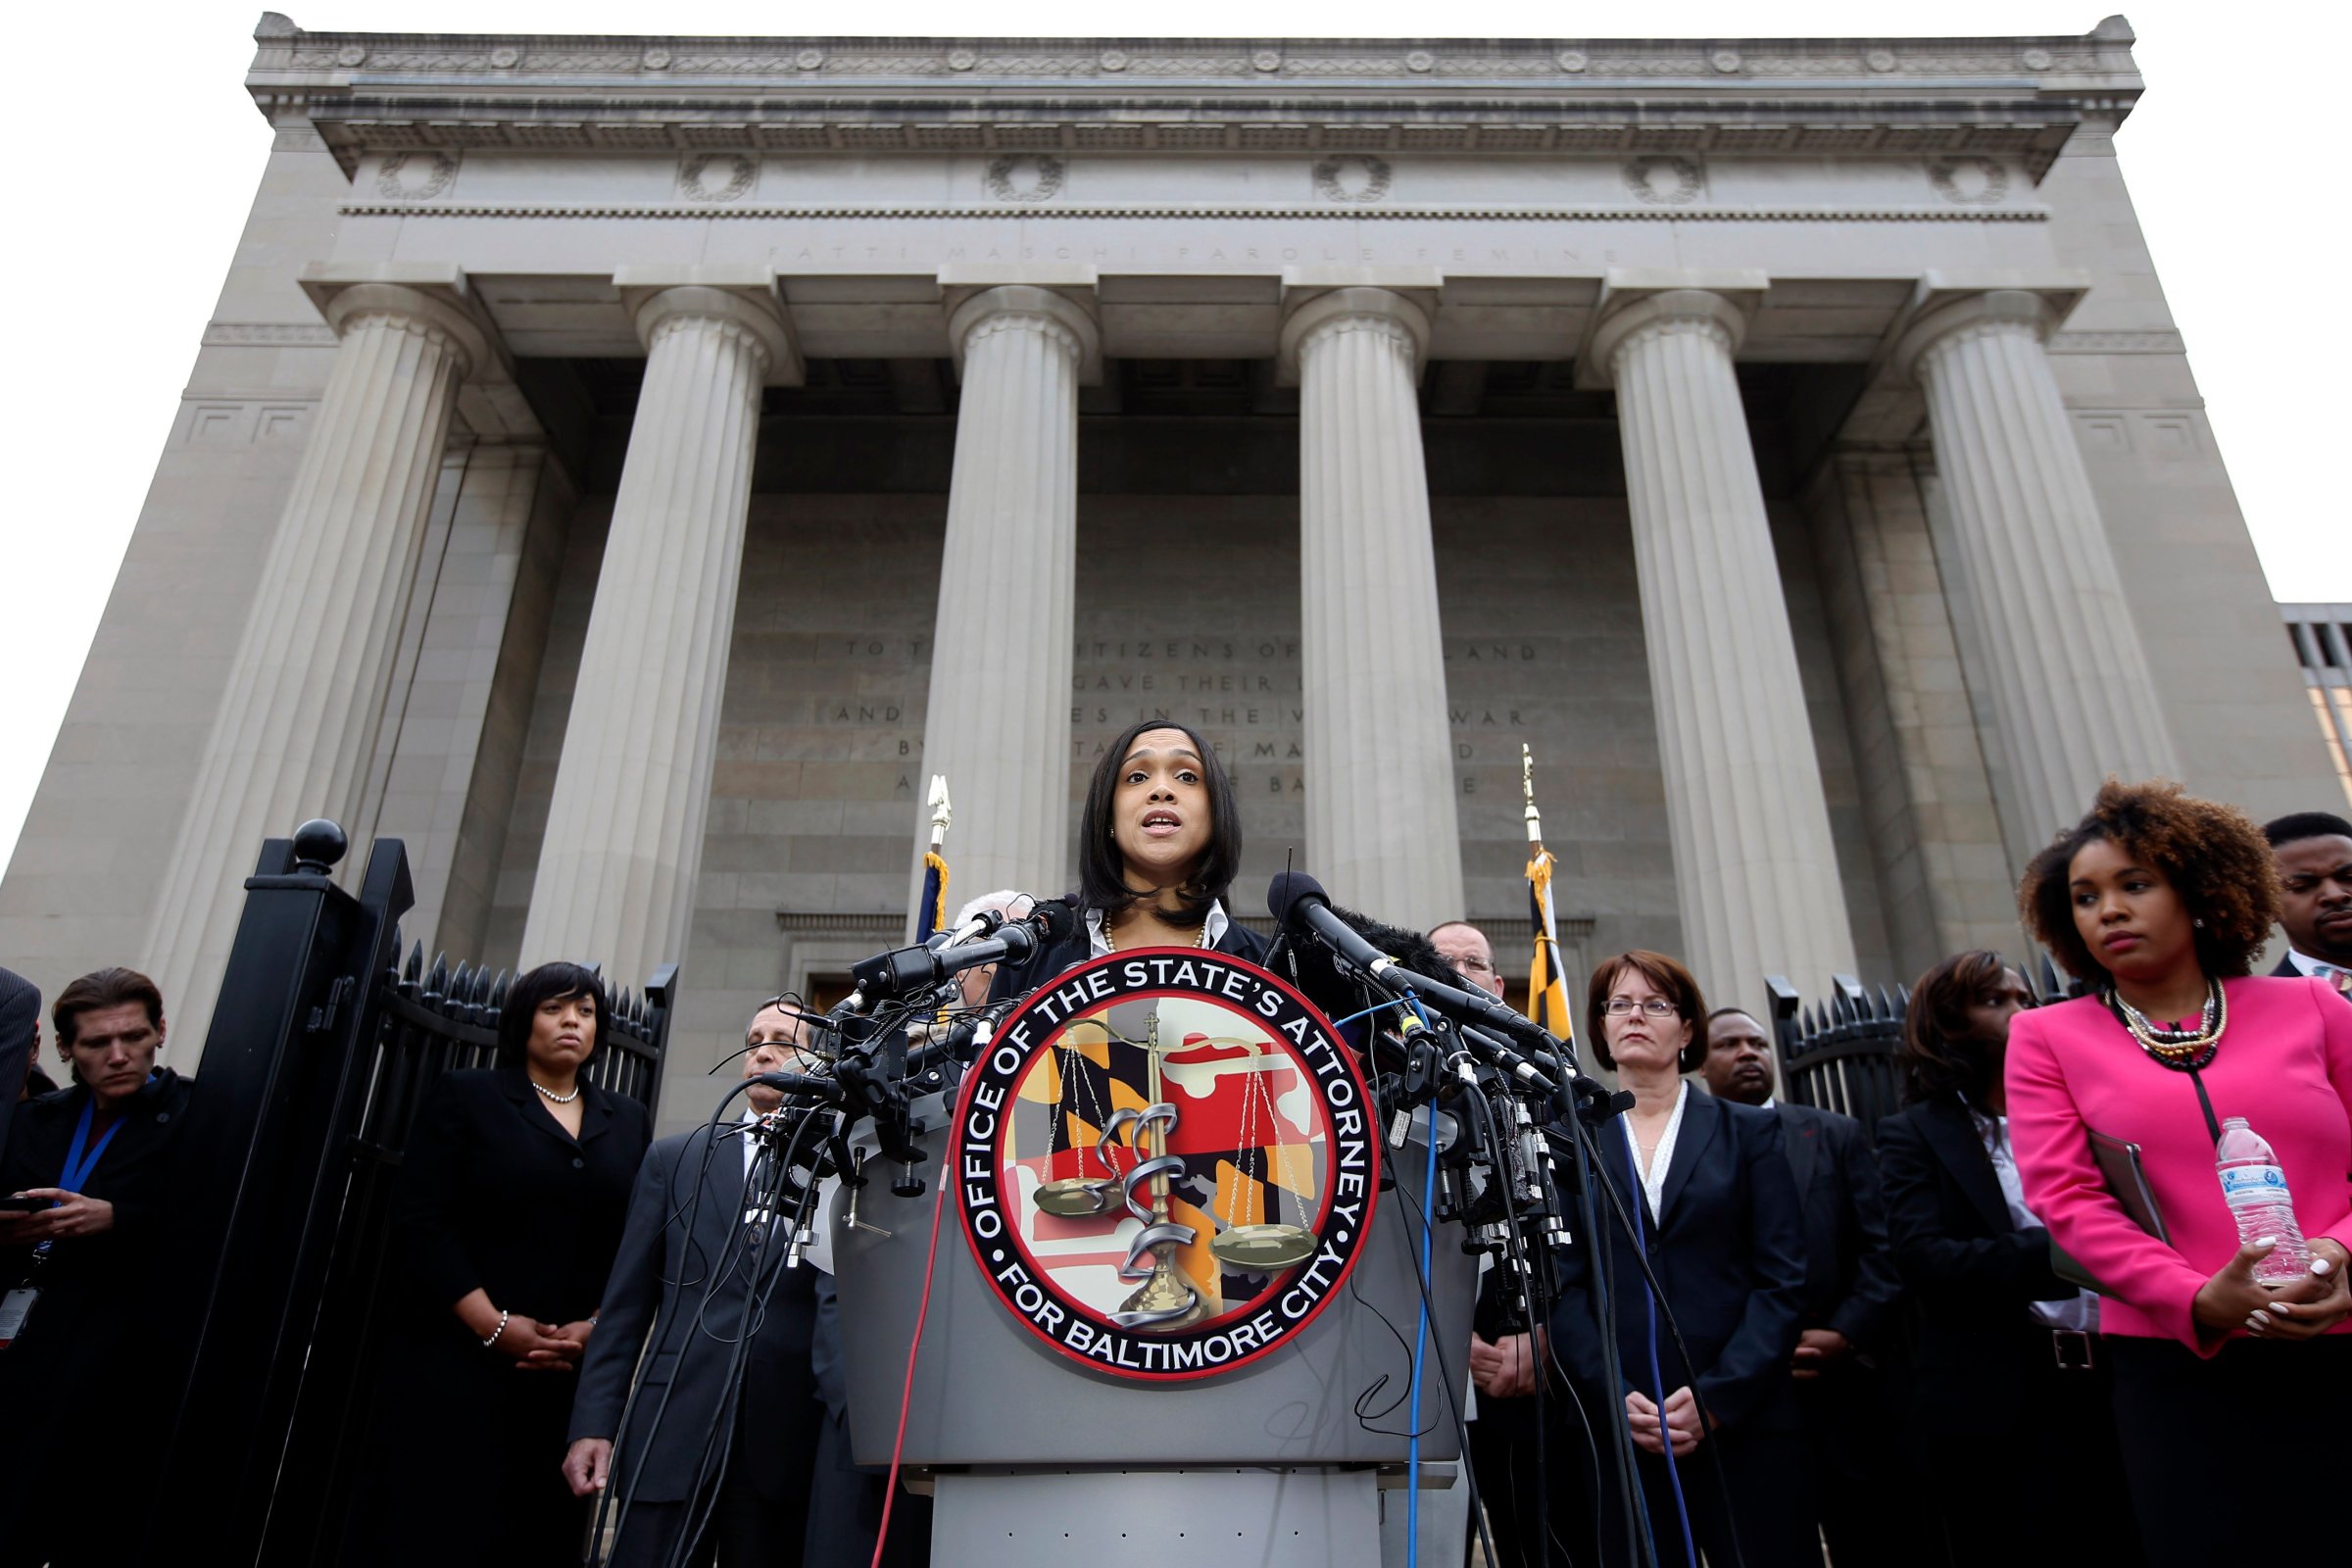 Marilyn Mosby, Baltimore state's attorney, speaks during a media availability on May 1, 2015 in Baltimore.